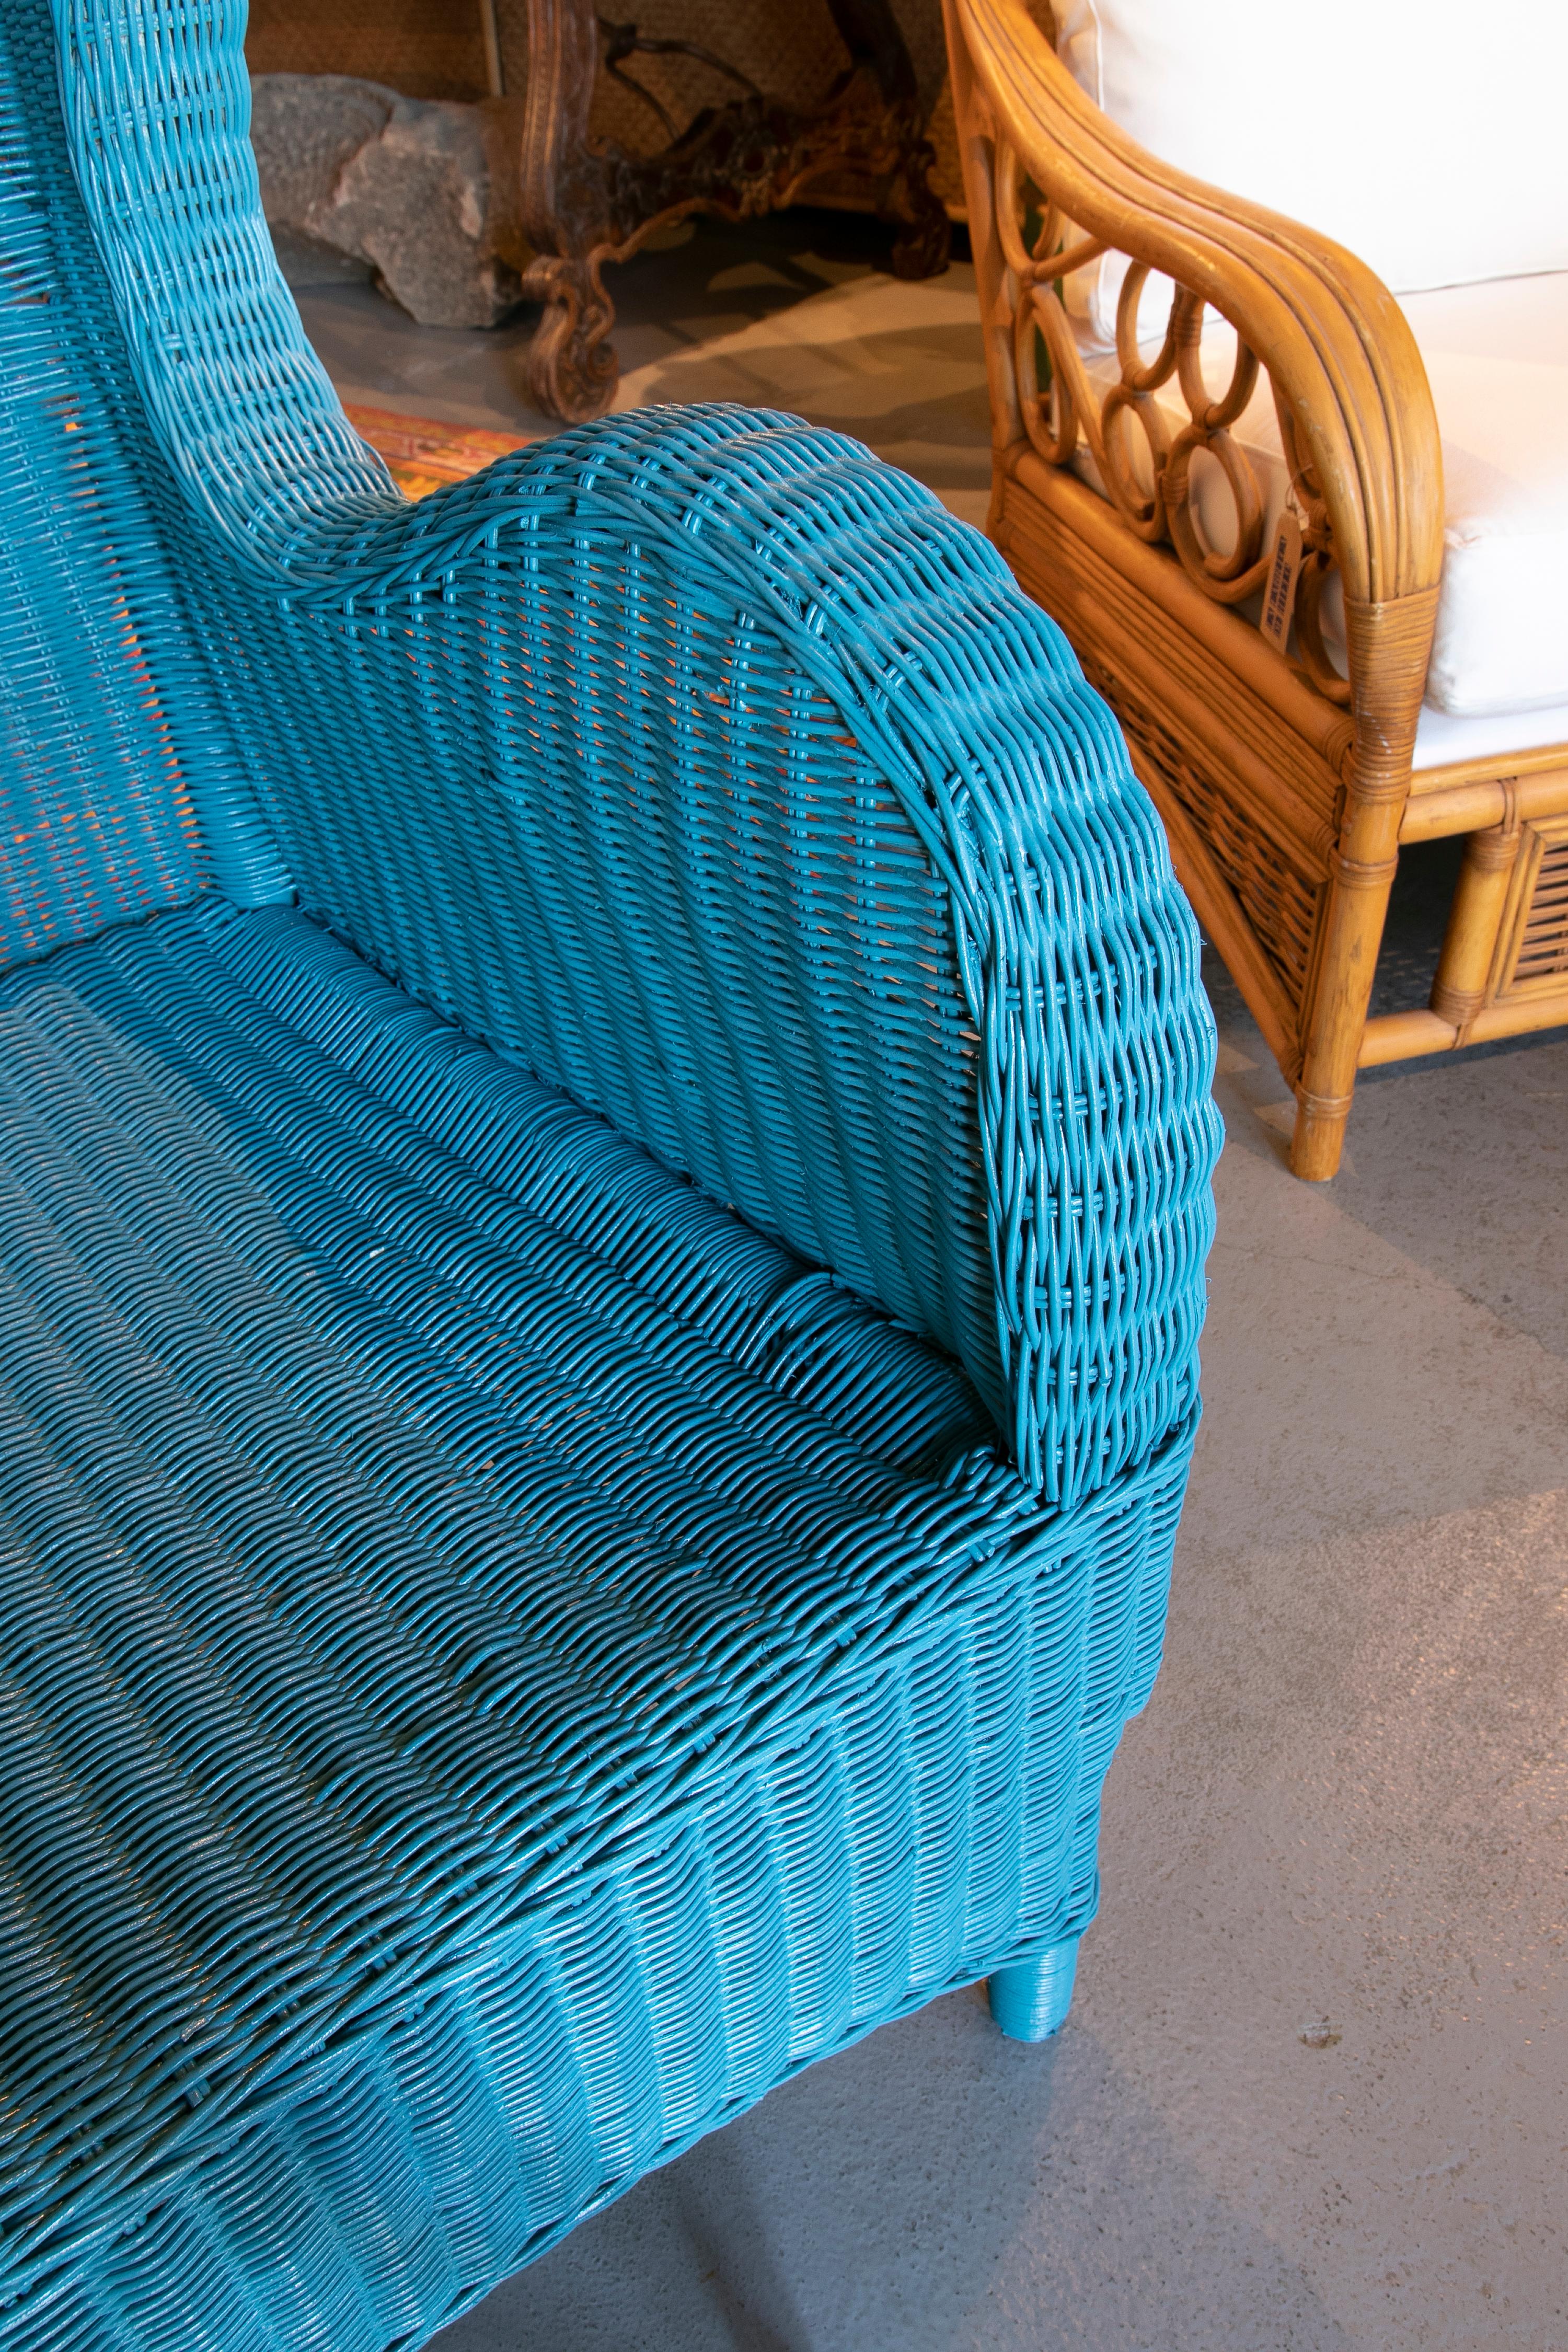 1970s Spanish Pair of Wicker Armchairs Painted in Blue 5